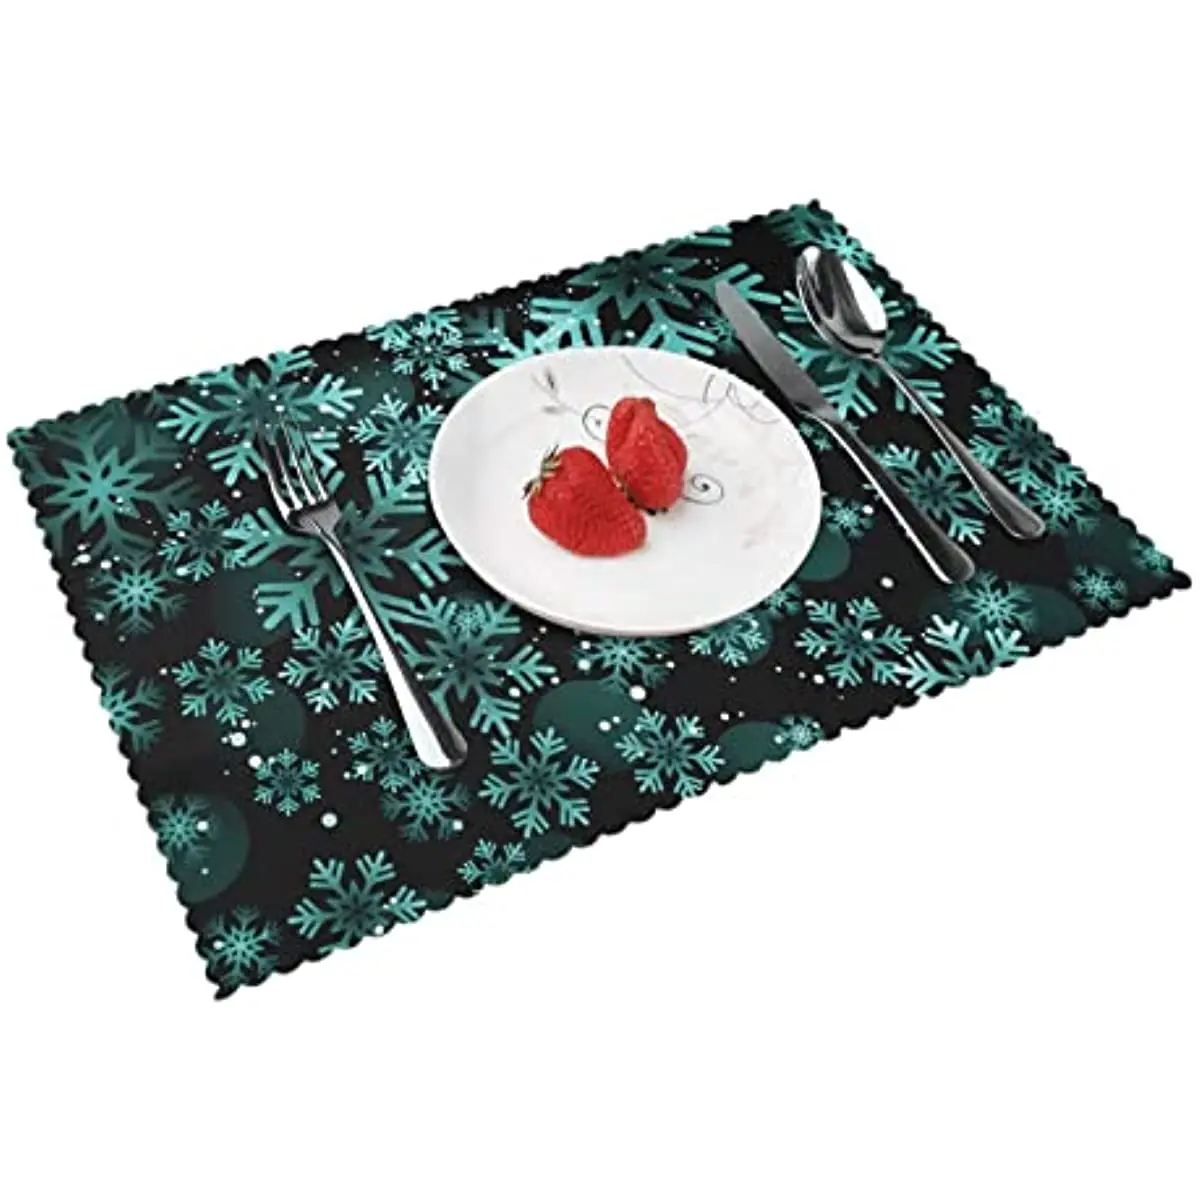 

Merry Christmas Placemats Set of 4 Christmas Snowflakes Place Mats Heat Resisting Washable Non Slip Xmas Table Mats Holiday